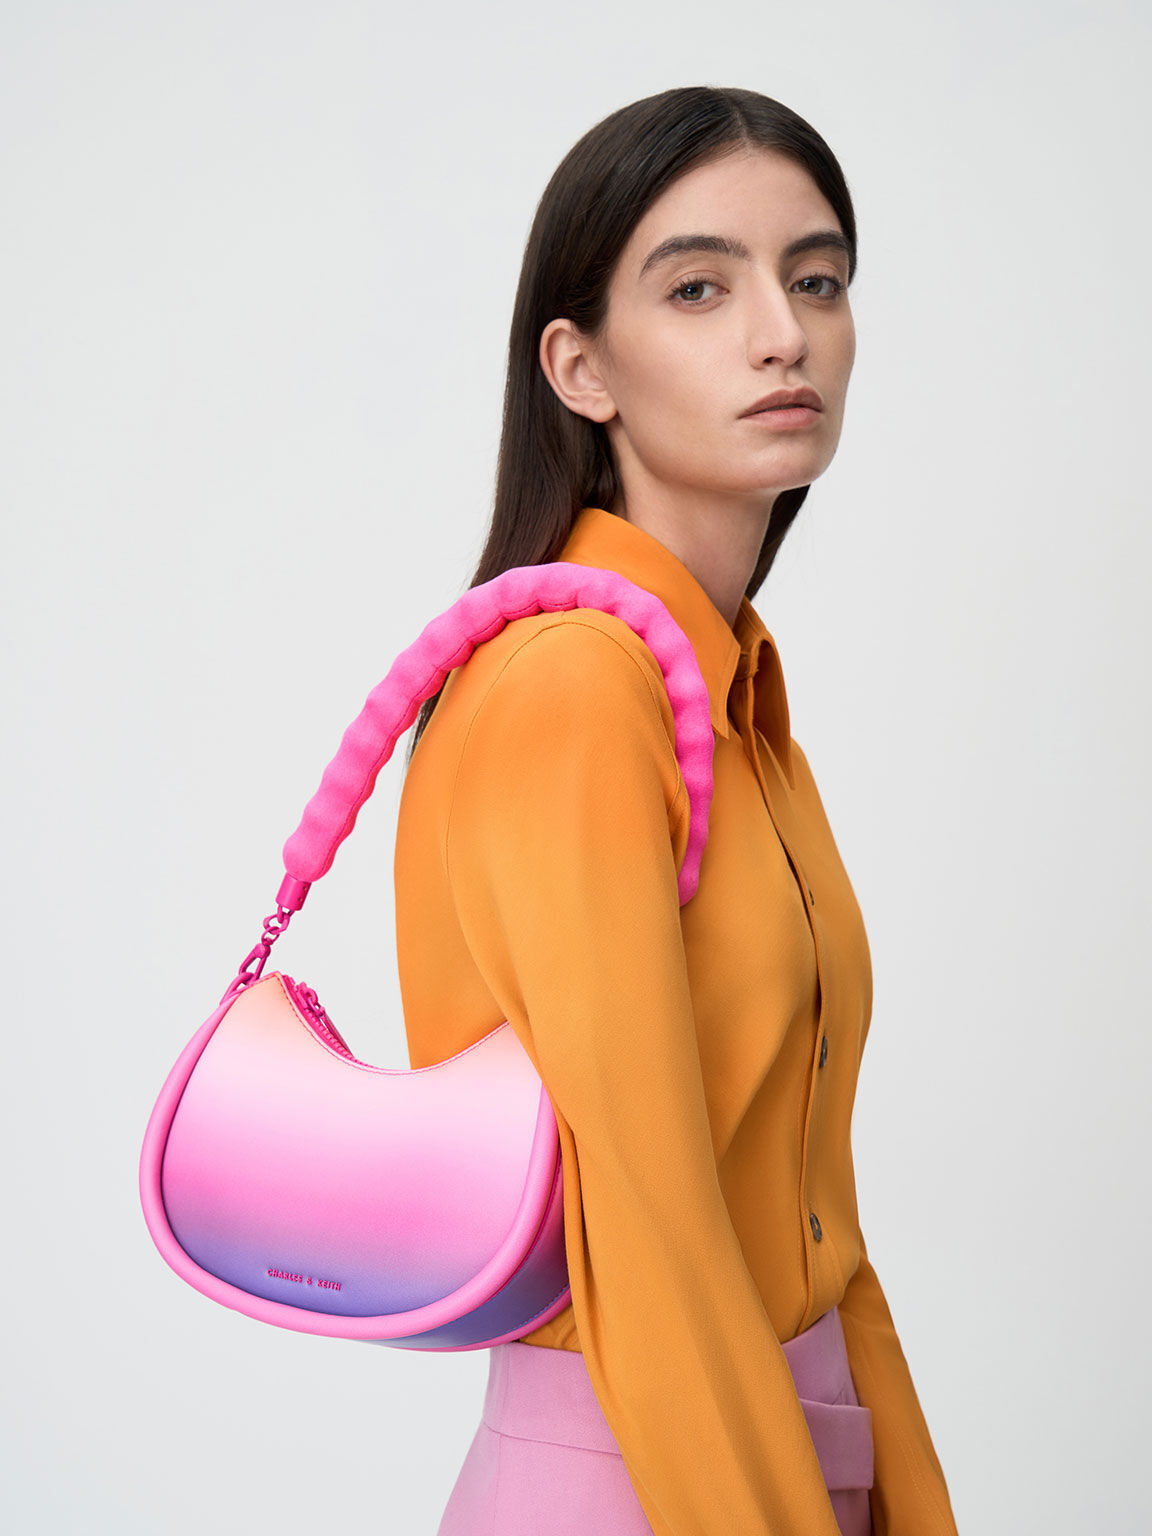 Holographic Lana Holographic Curved Shoulder Bag - CHARLES & KEITH TH